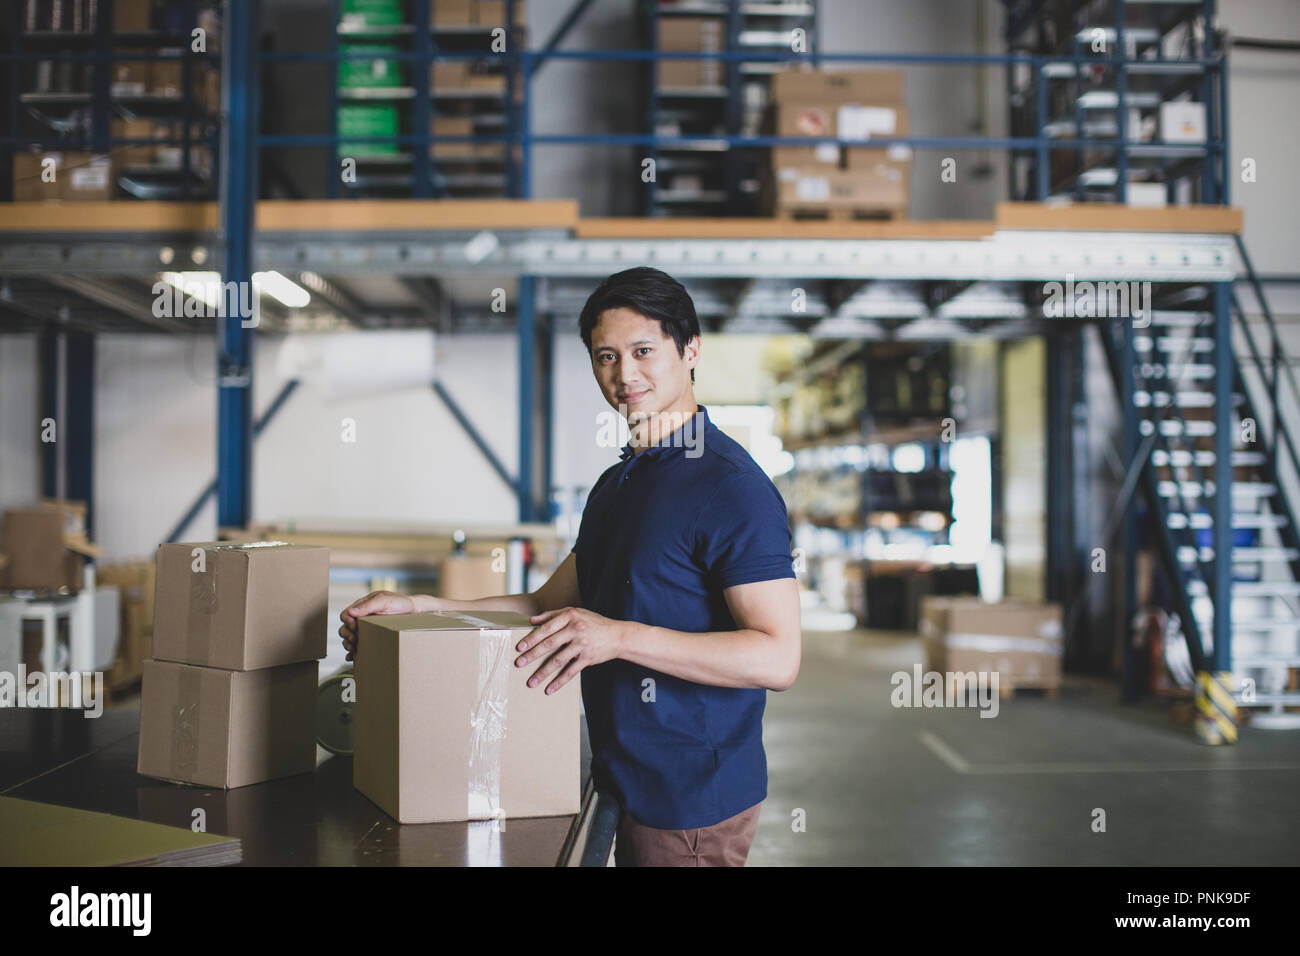 Portrait of male working in packing warehouse Stock Photo